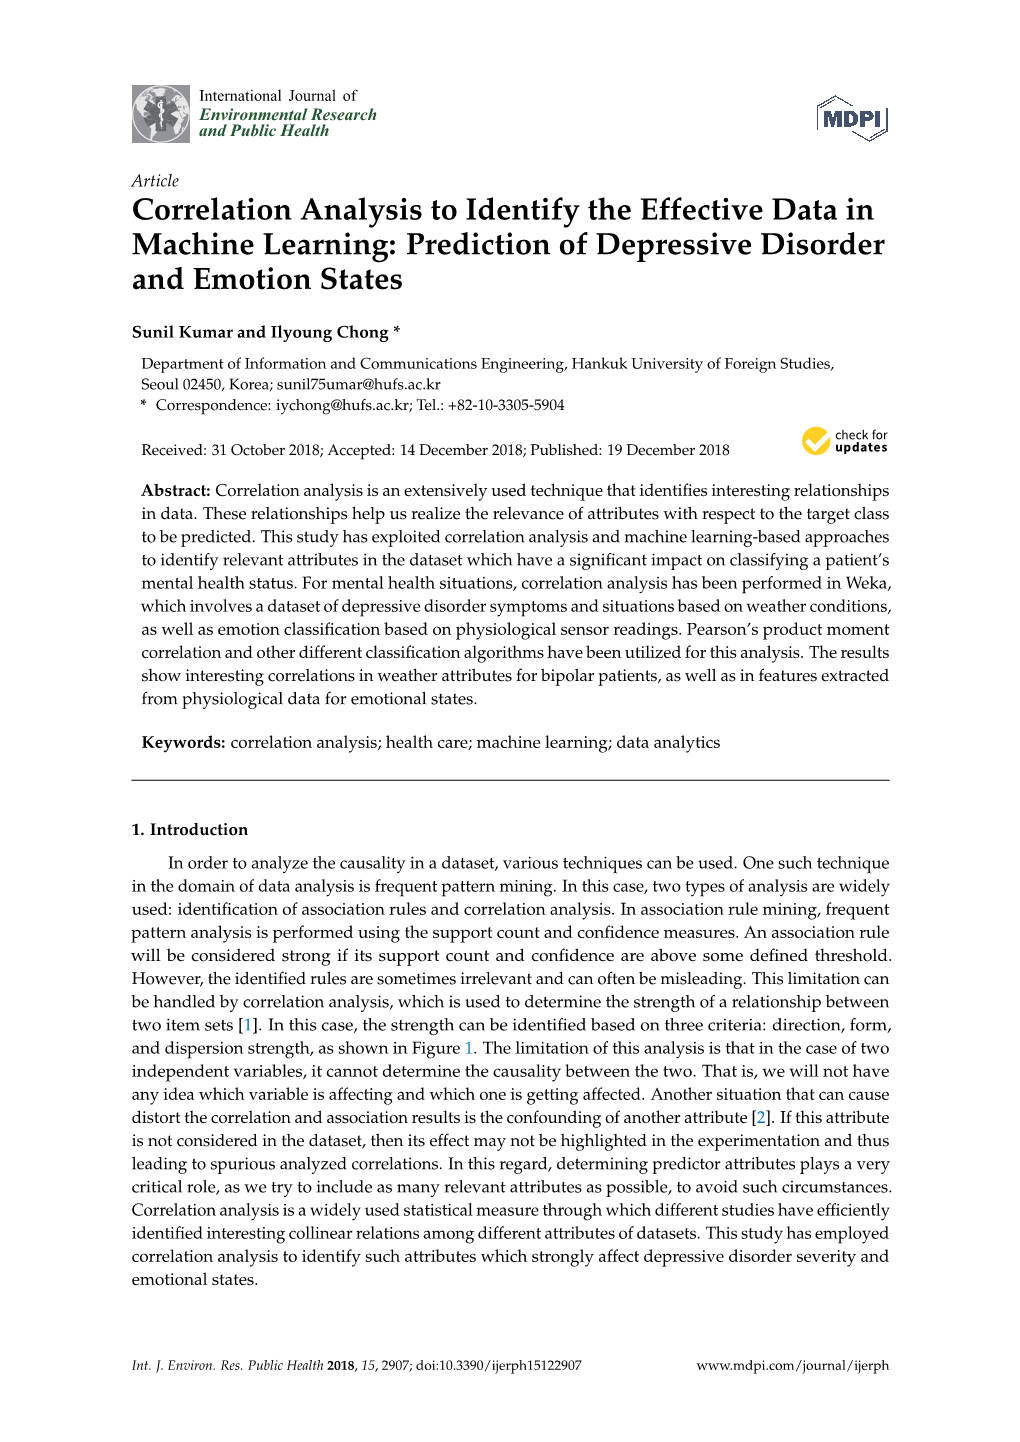 Correlation Analysis to Identify the Effective Data in Machine Learning: Prediction of Depressive Disorder and Emotion States